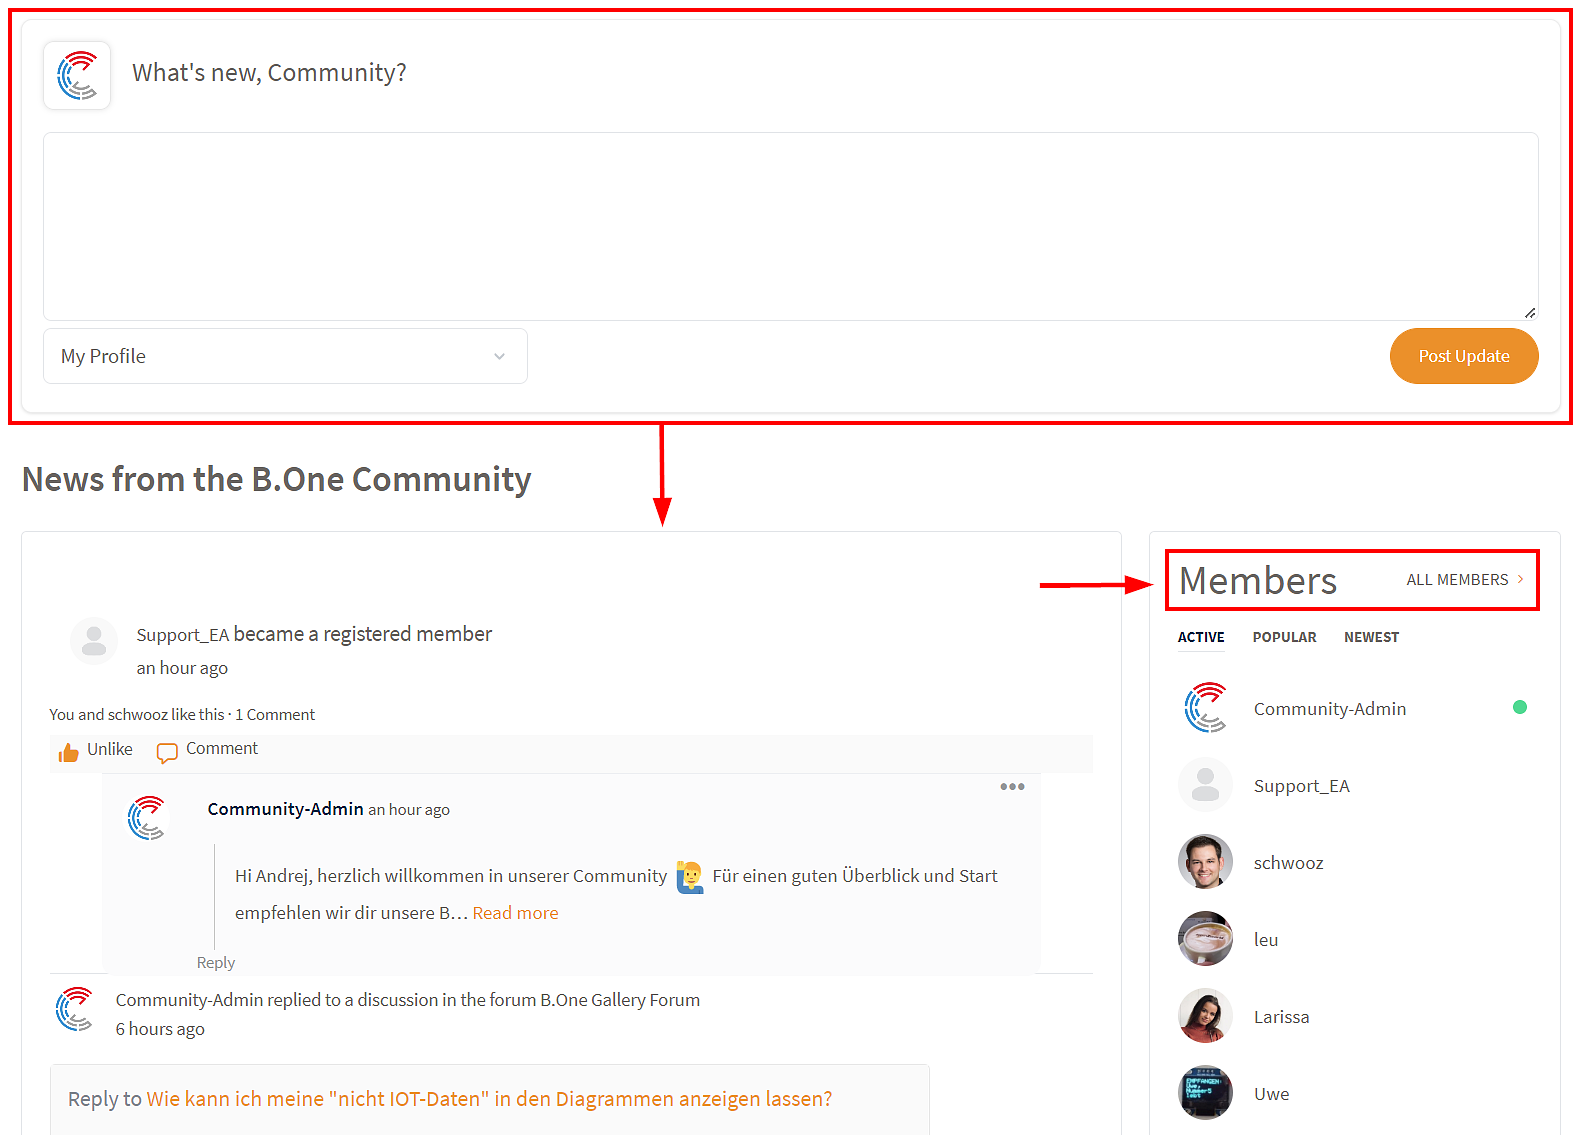 B.One Community: Activities, Updates and Members in the Dashboard